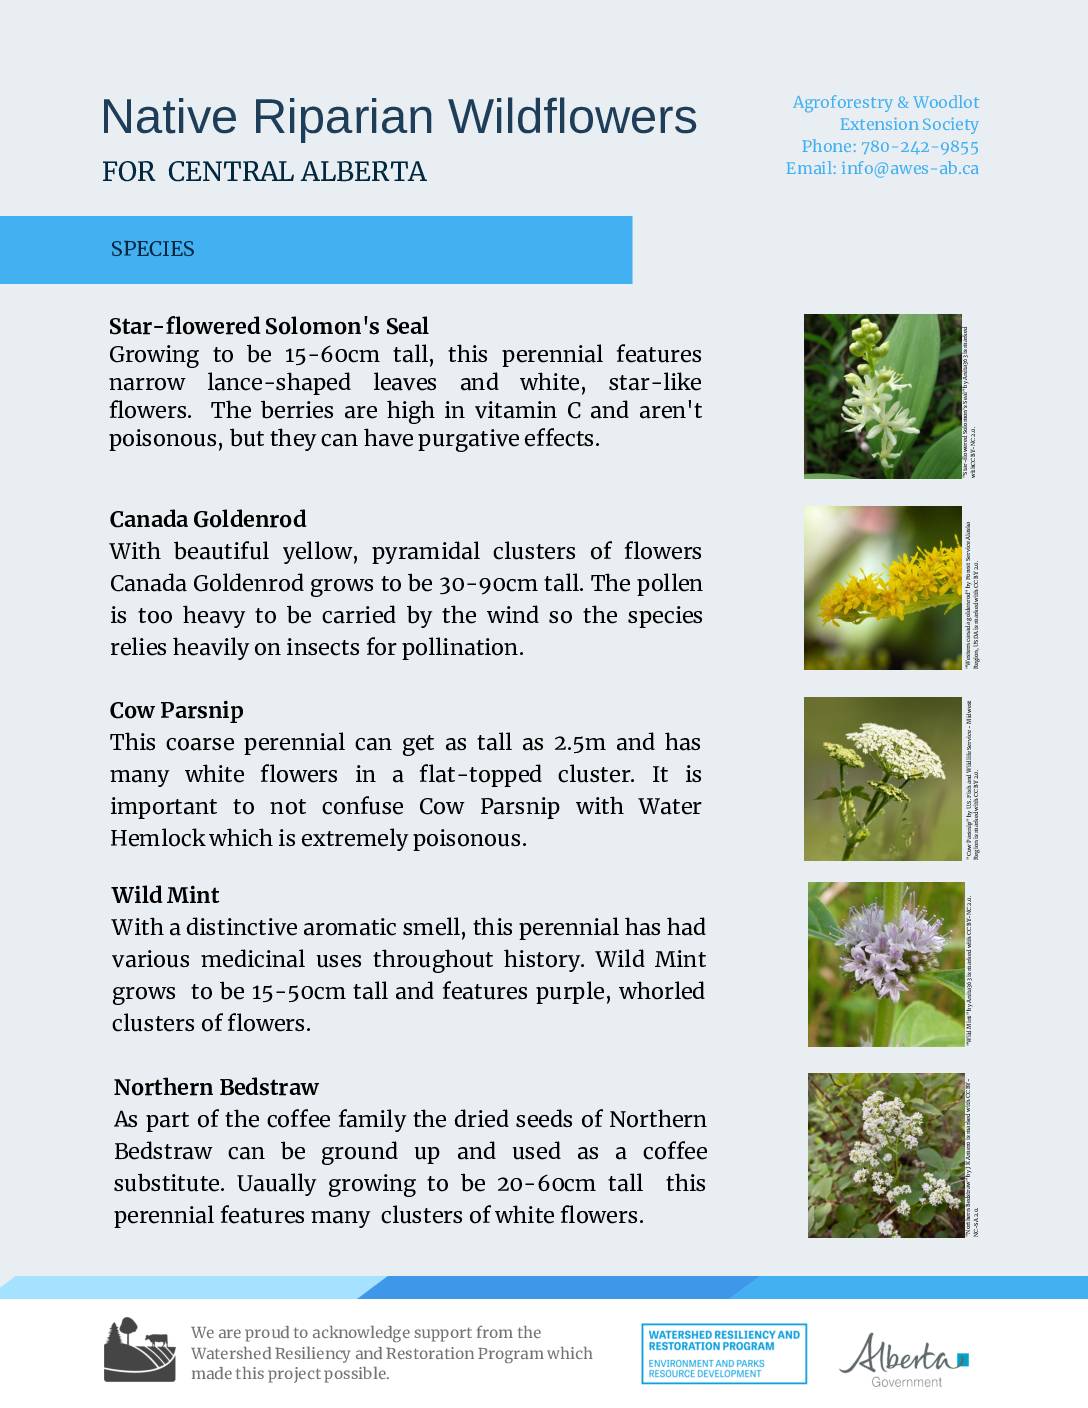 Native Riparian Wildflowers for Central Alberta